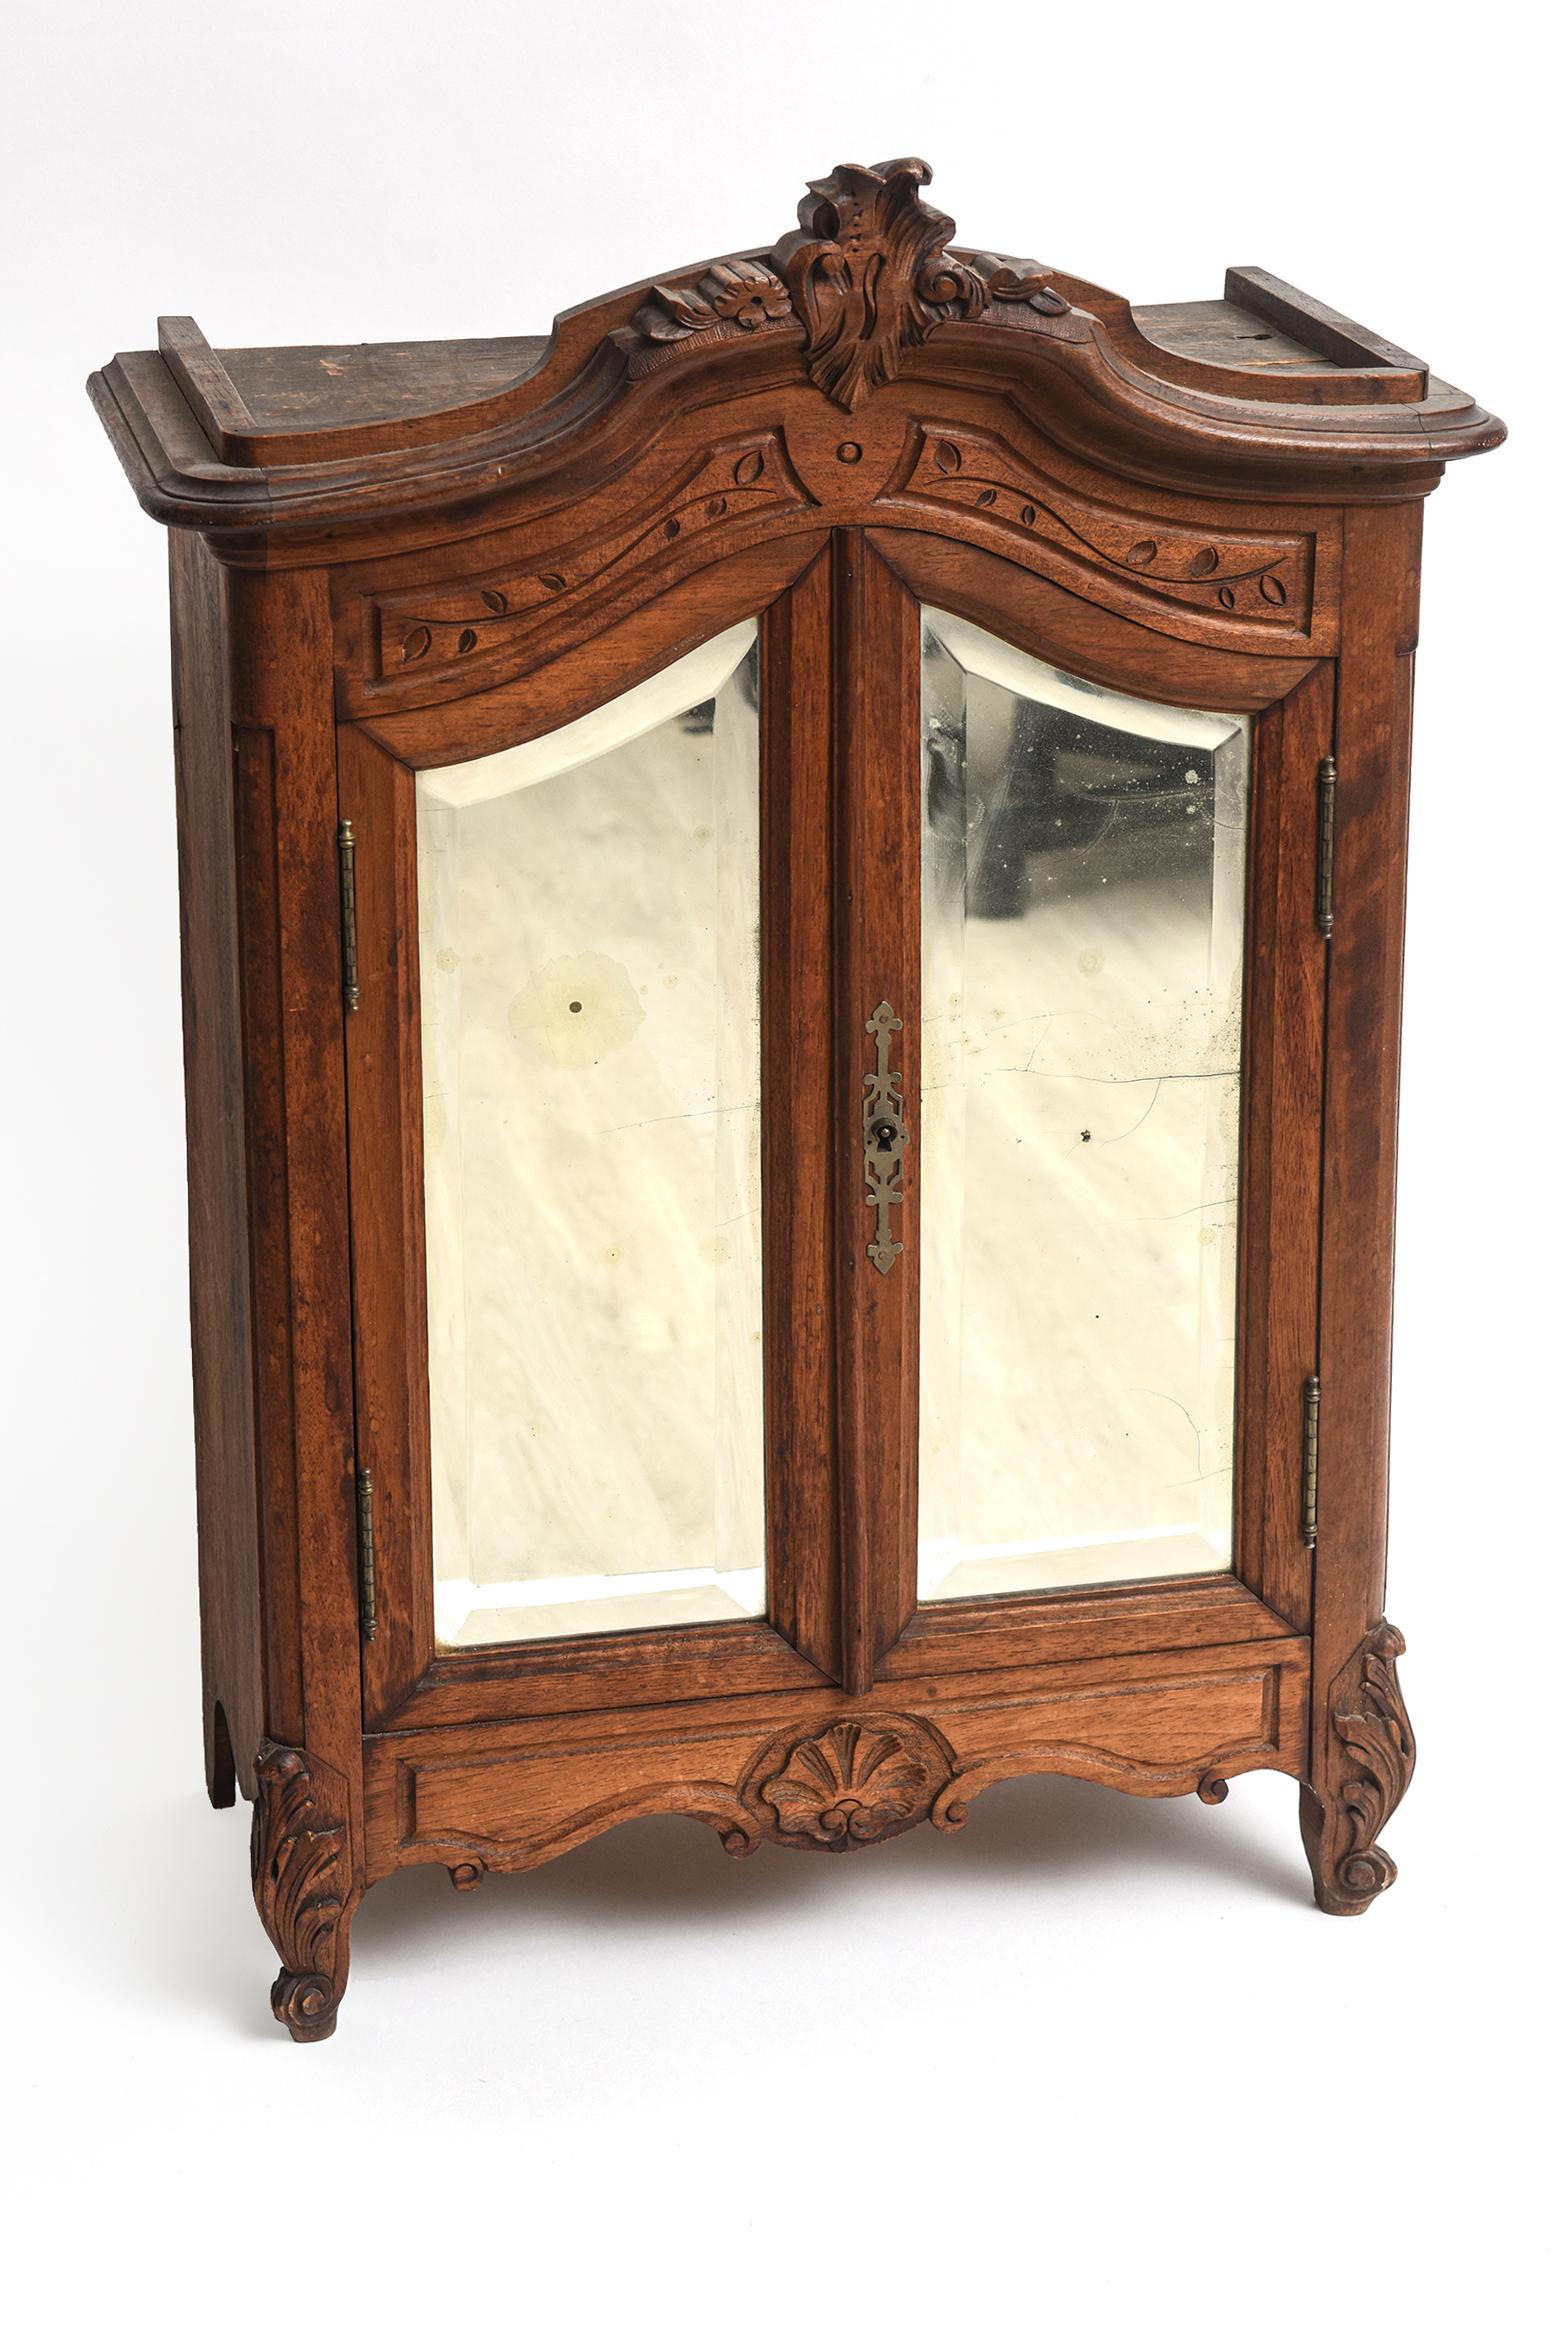 19th Century Victorian miniature armoire used by salesman to show their wears back in the olden days. This cabinet features a pair of double mirrored doors that open up to reveal two areas were you can put folded items. Perfect as a display or to be